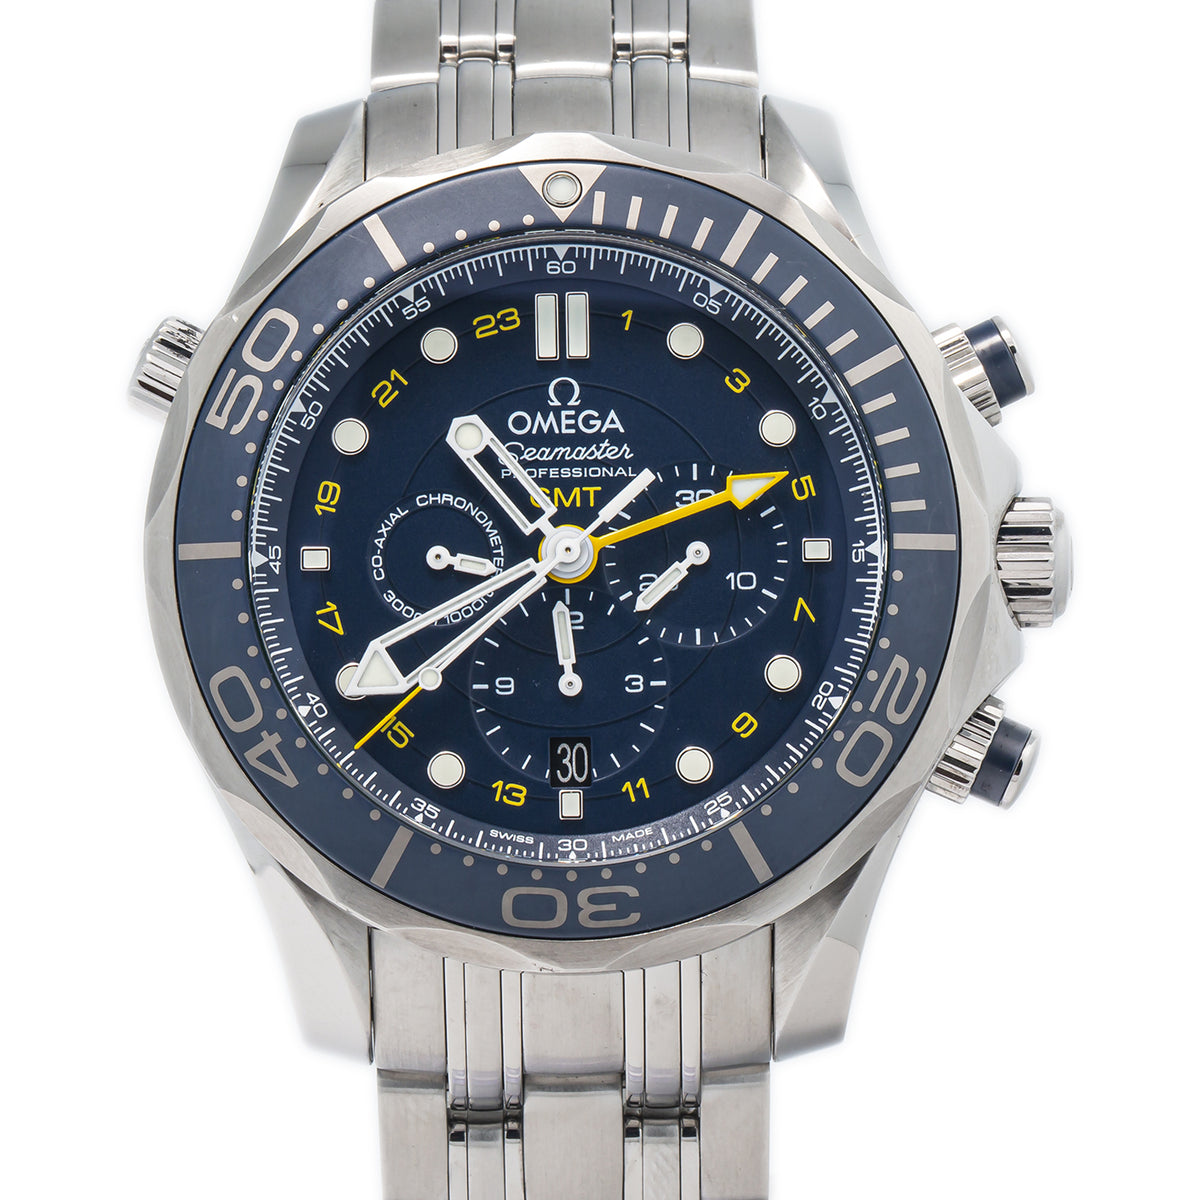 Omega Seamaster Diver 212.30.44.52.03.001 GMT 300M Chrono Blue Dial Watch 44mm